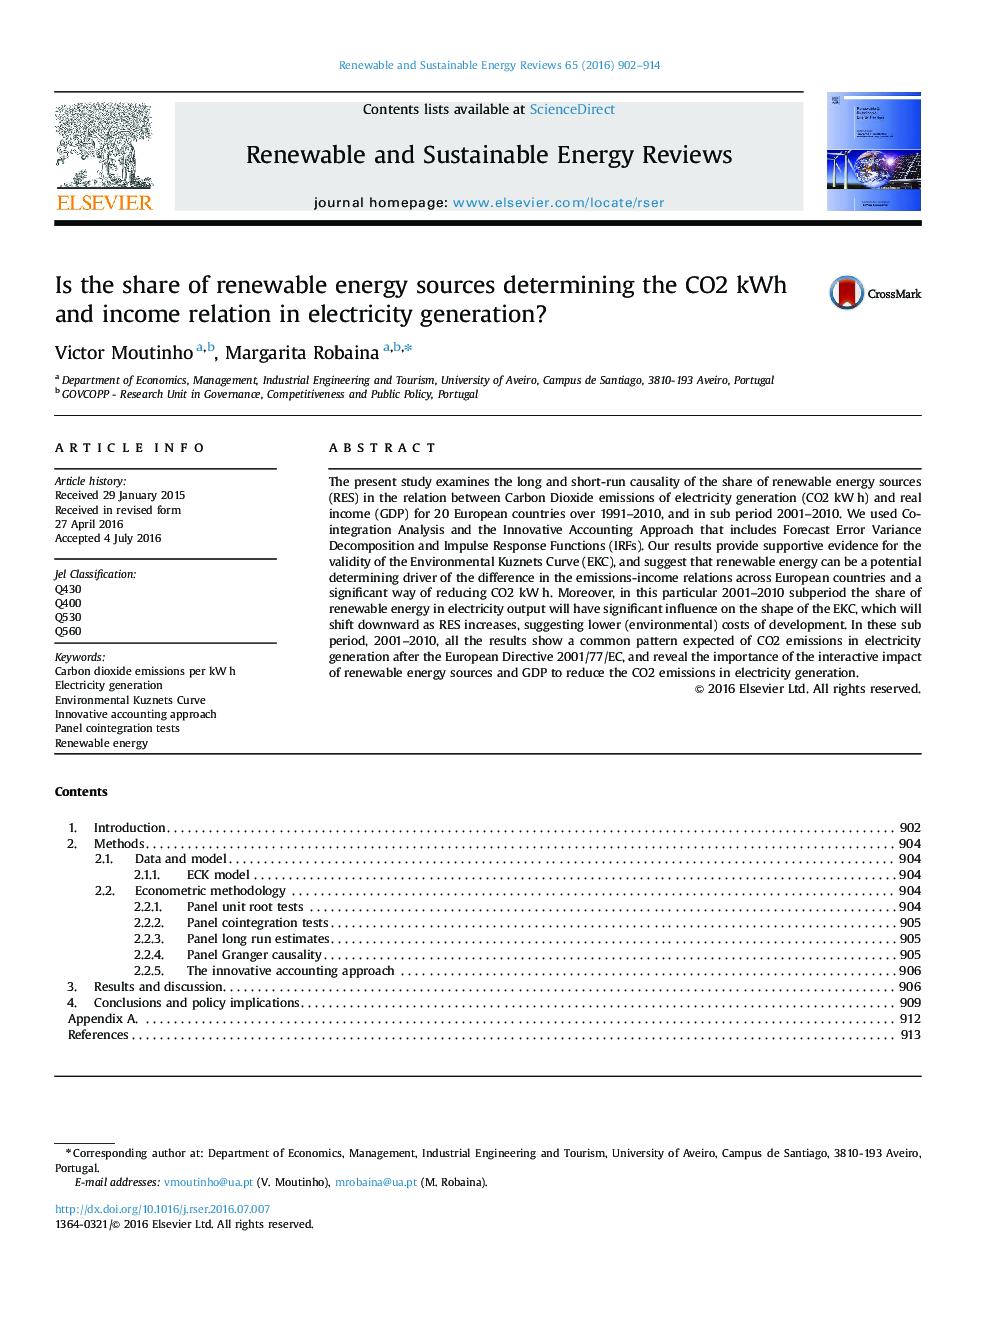 Is the share of renewable energy sources determining the CO2 kWh and income relation in electricity generation?